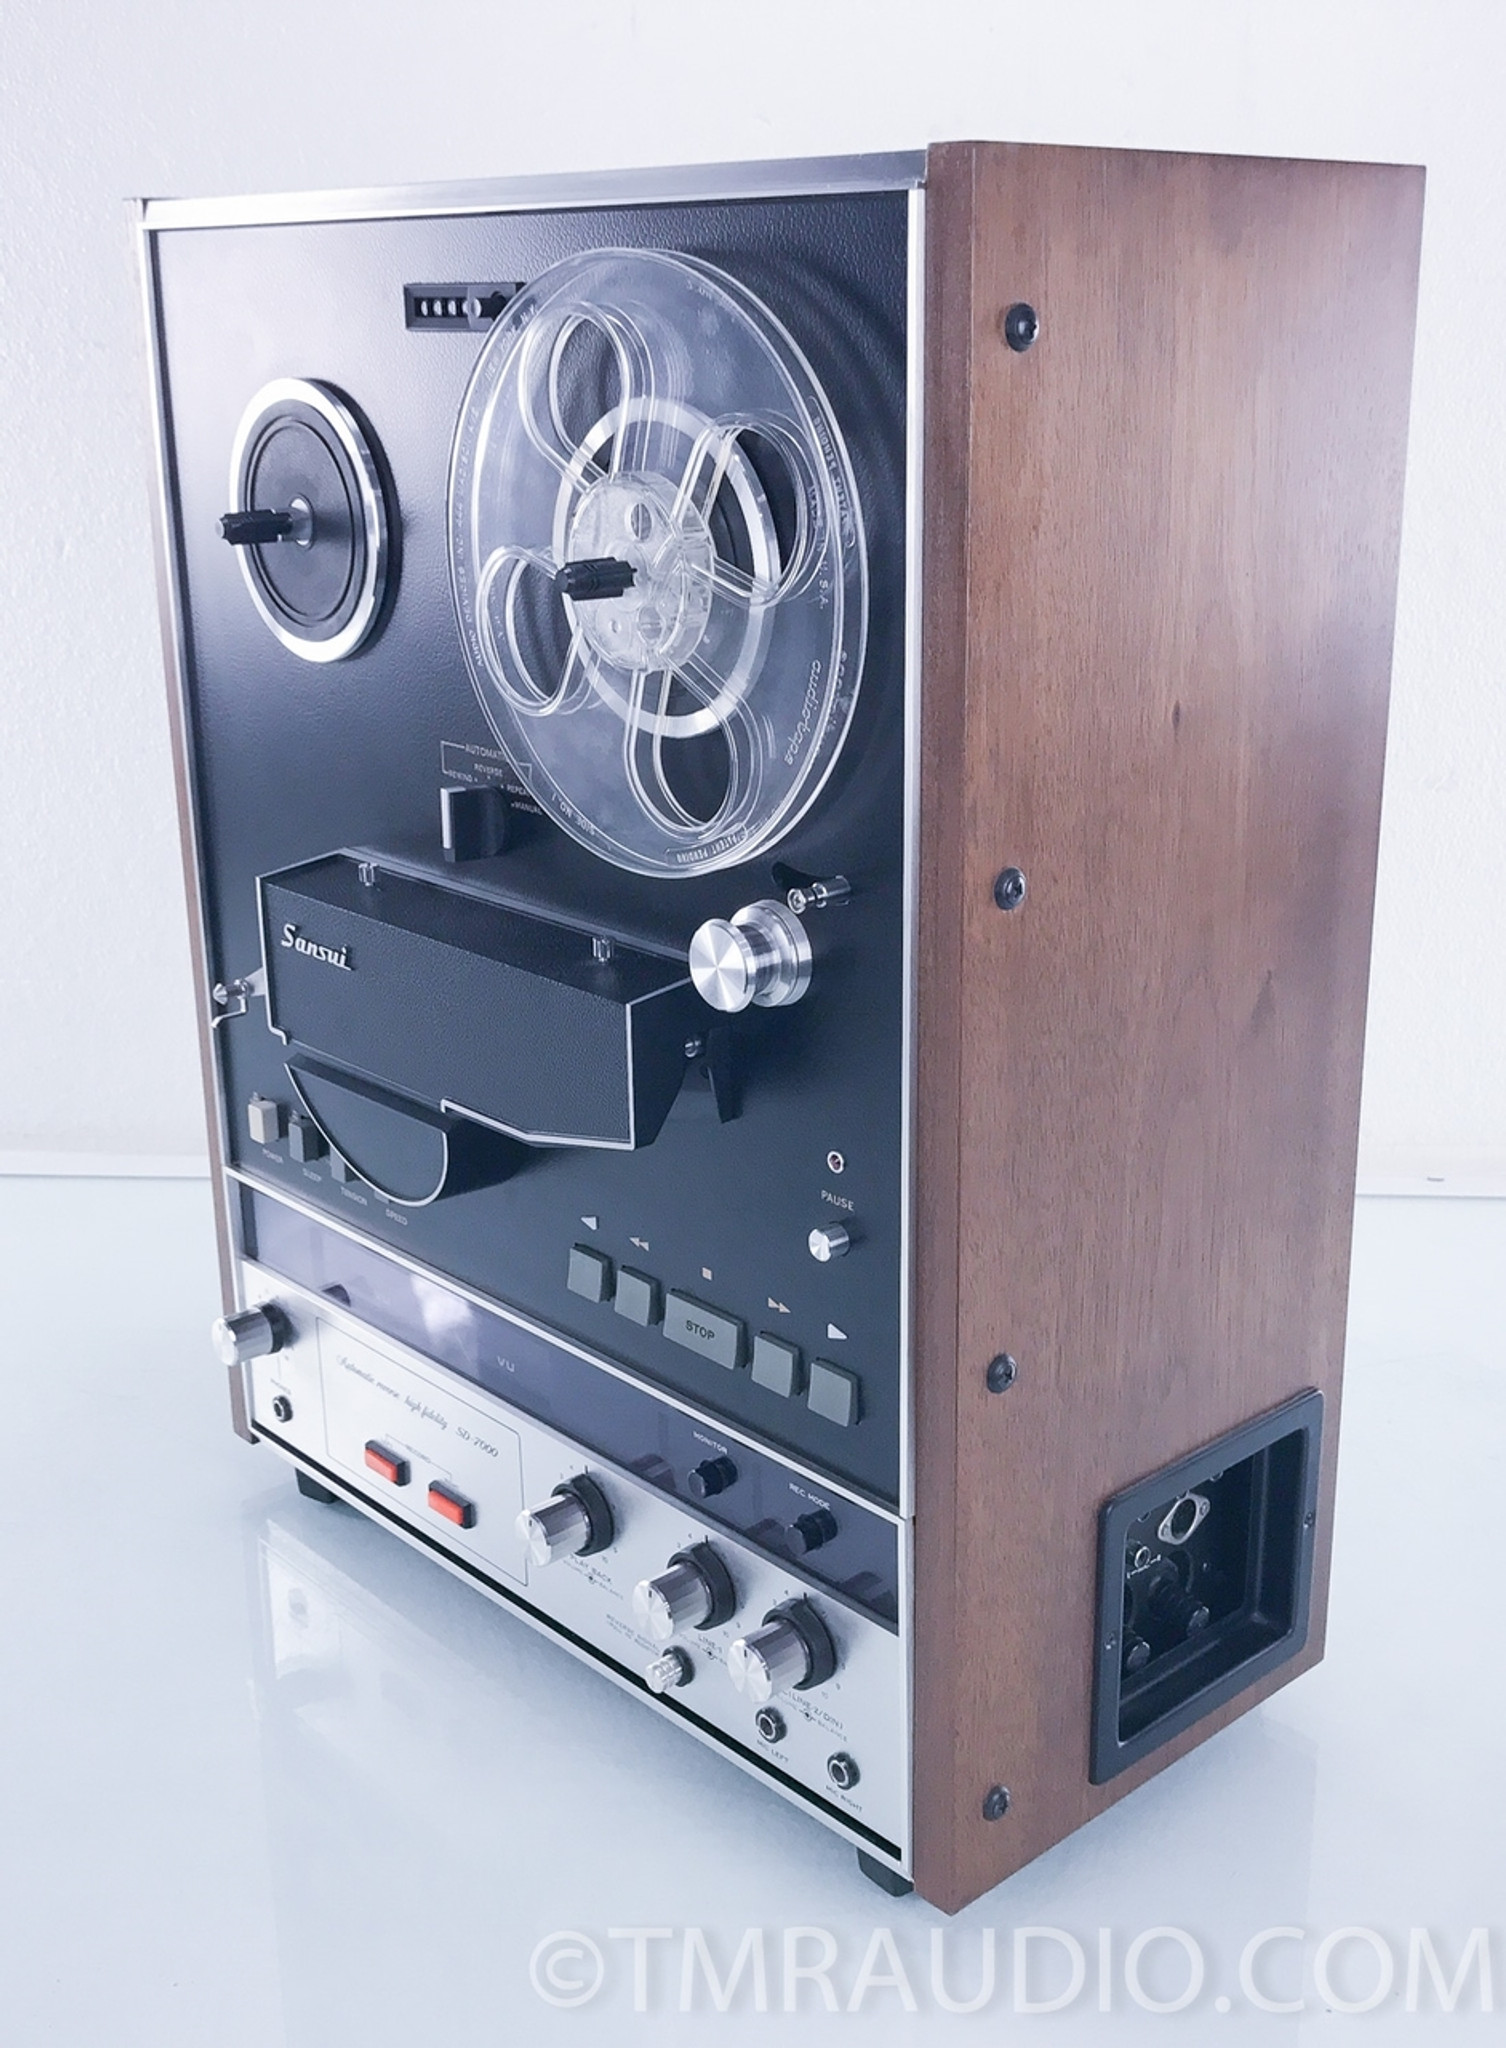 Sansui SD-7000 Vintage Reel to Reel Tape Recorder / Player - The Music Room